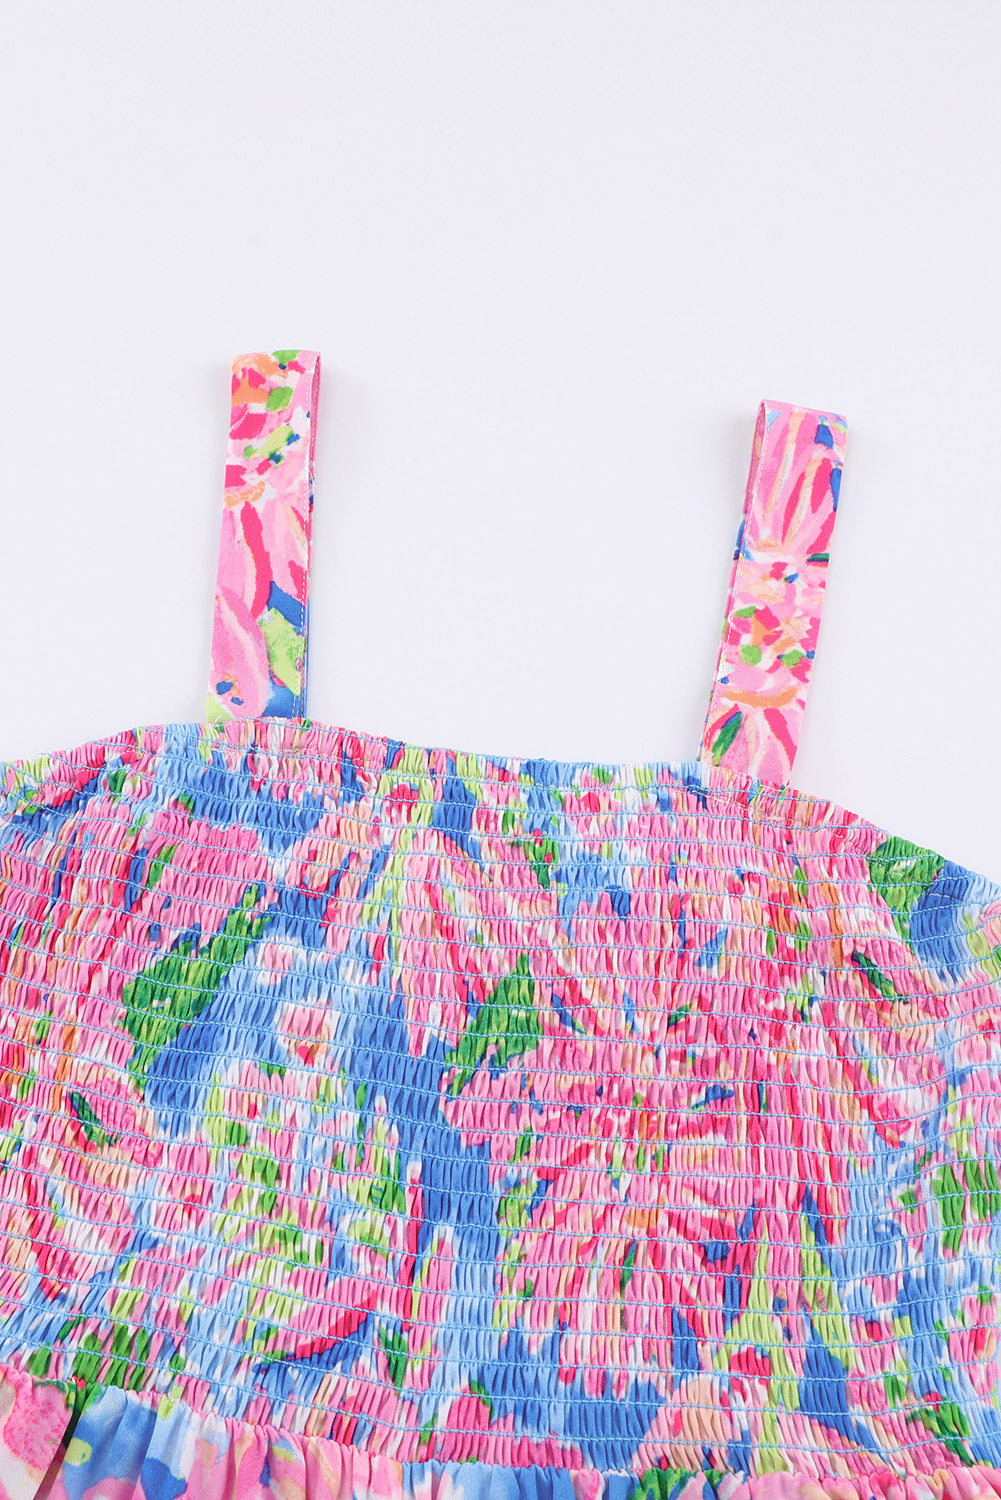 Floral Smocked Square Neck Jumpsuit with Pockets - Runway Frenzy